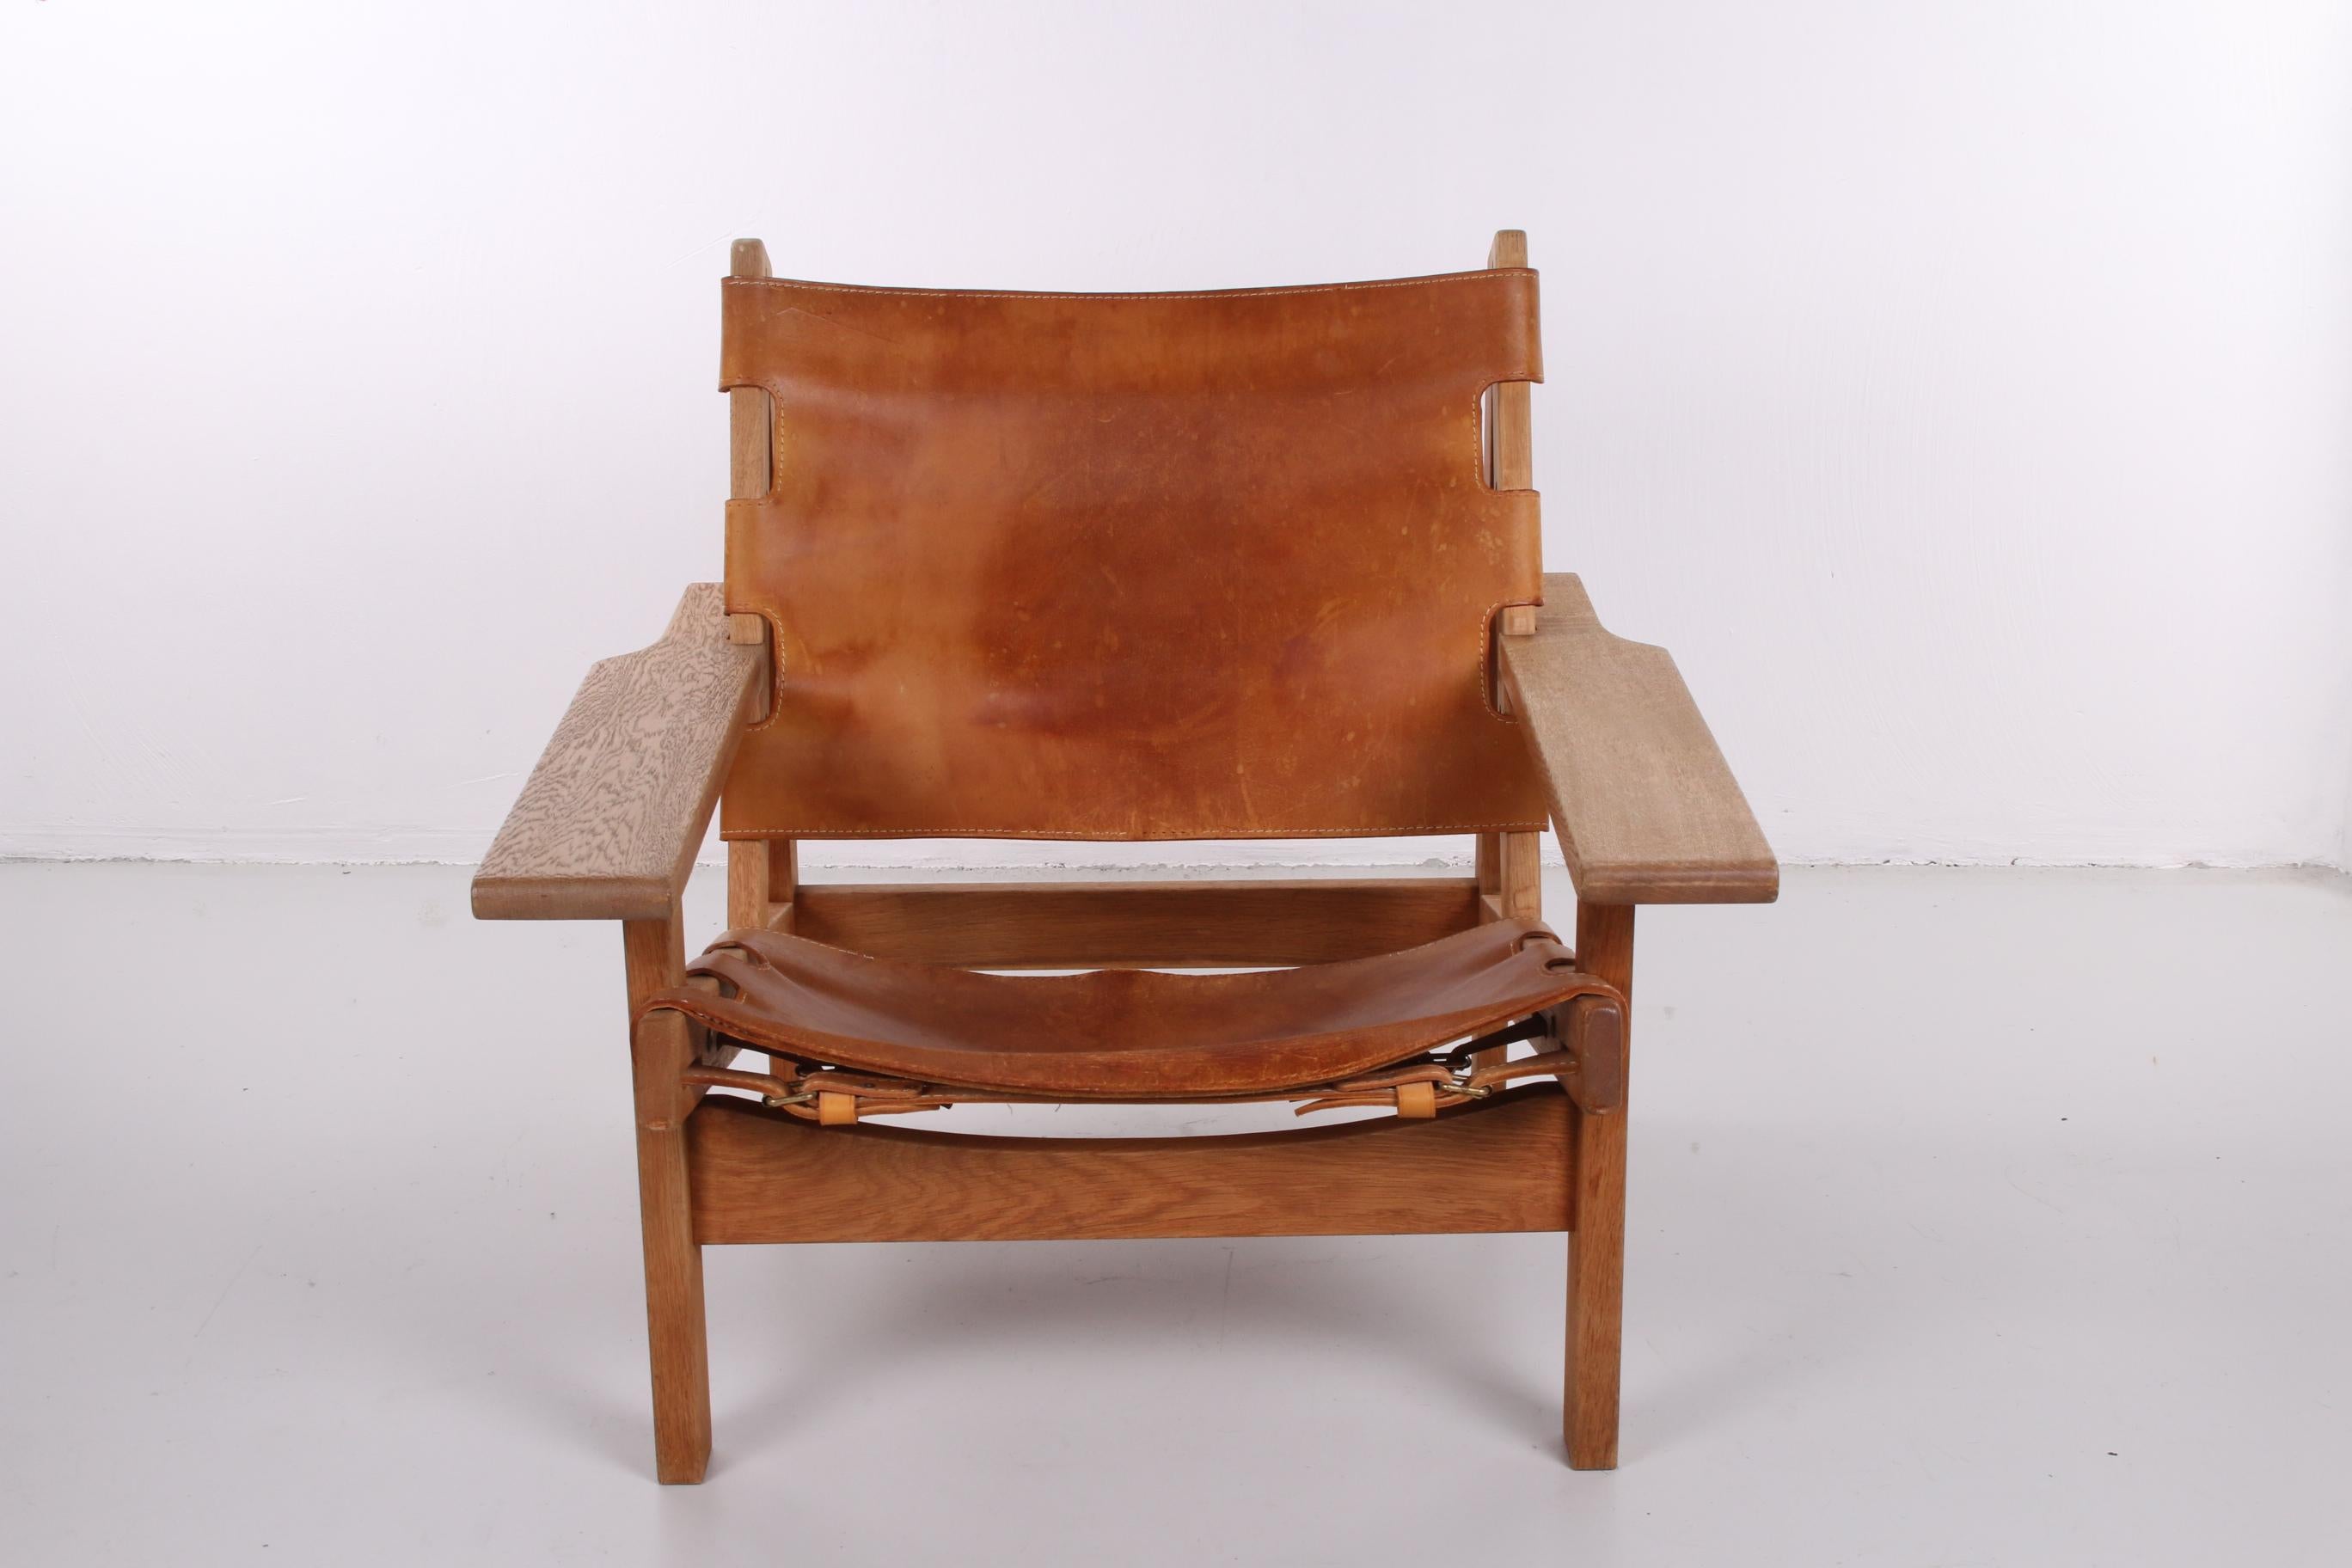 This beautiful Safari chair has a solid oak wood frame. It was made by the Danish designer Kurt Østervig for KP Møbler. The saddle leather seat has a rich cognac color and is attached tot the chair with several clasps and buckles that show on the